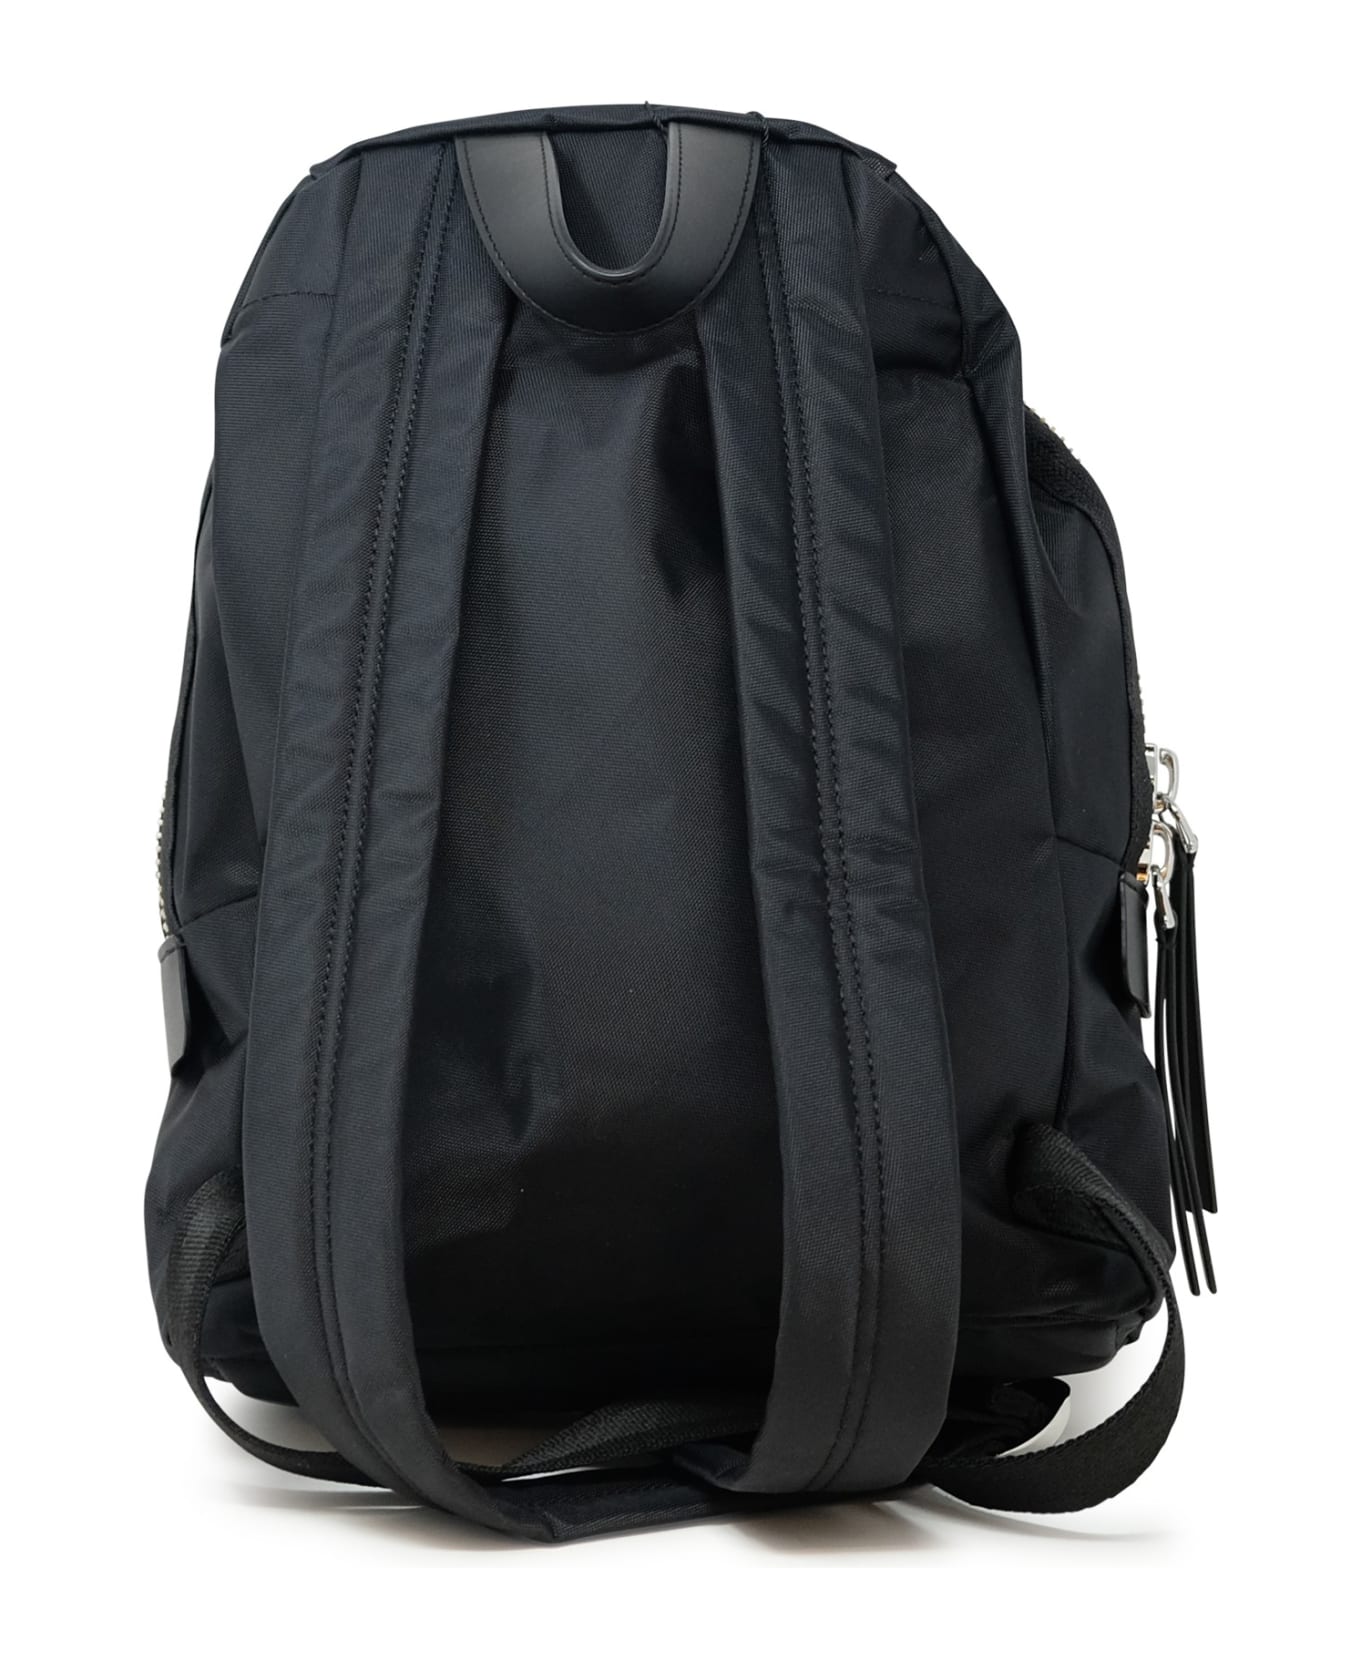 Marc Jacobs The Medium Backpack バックパック